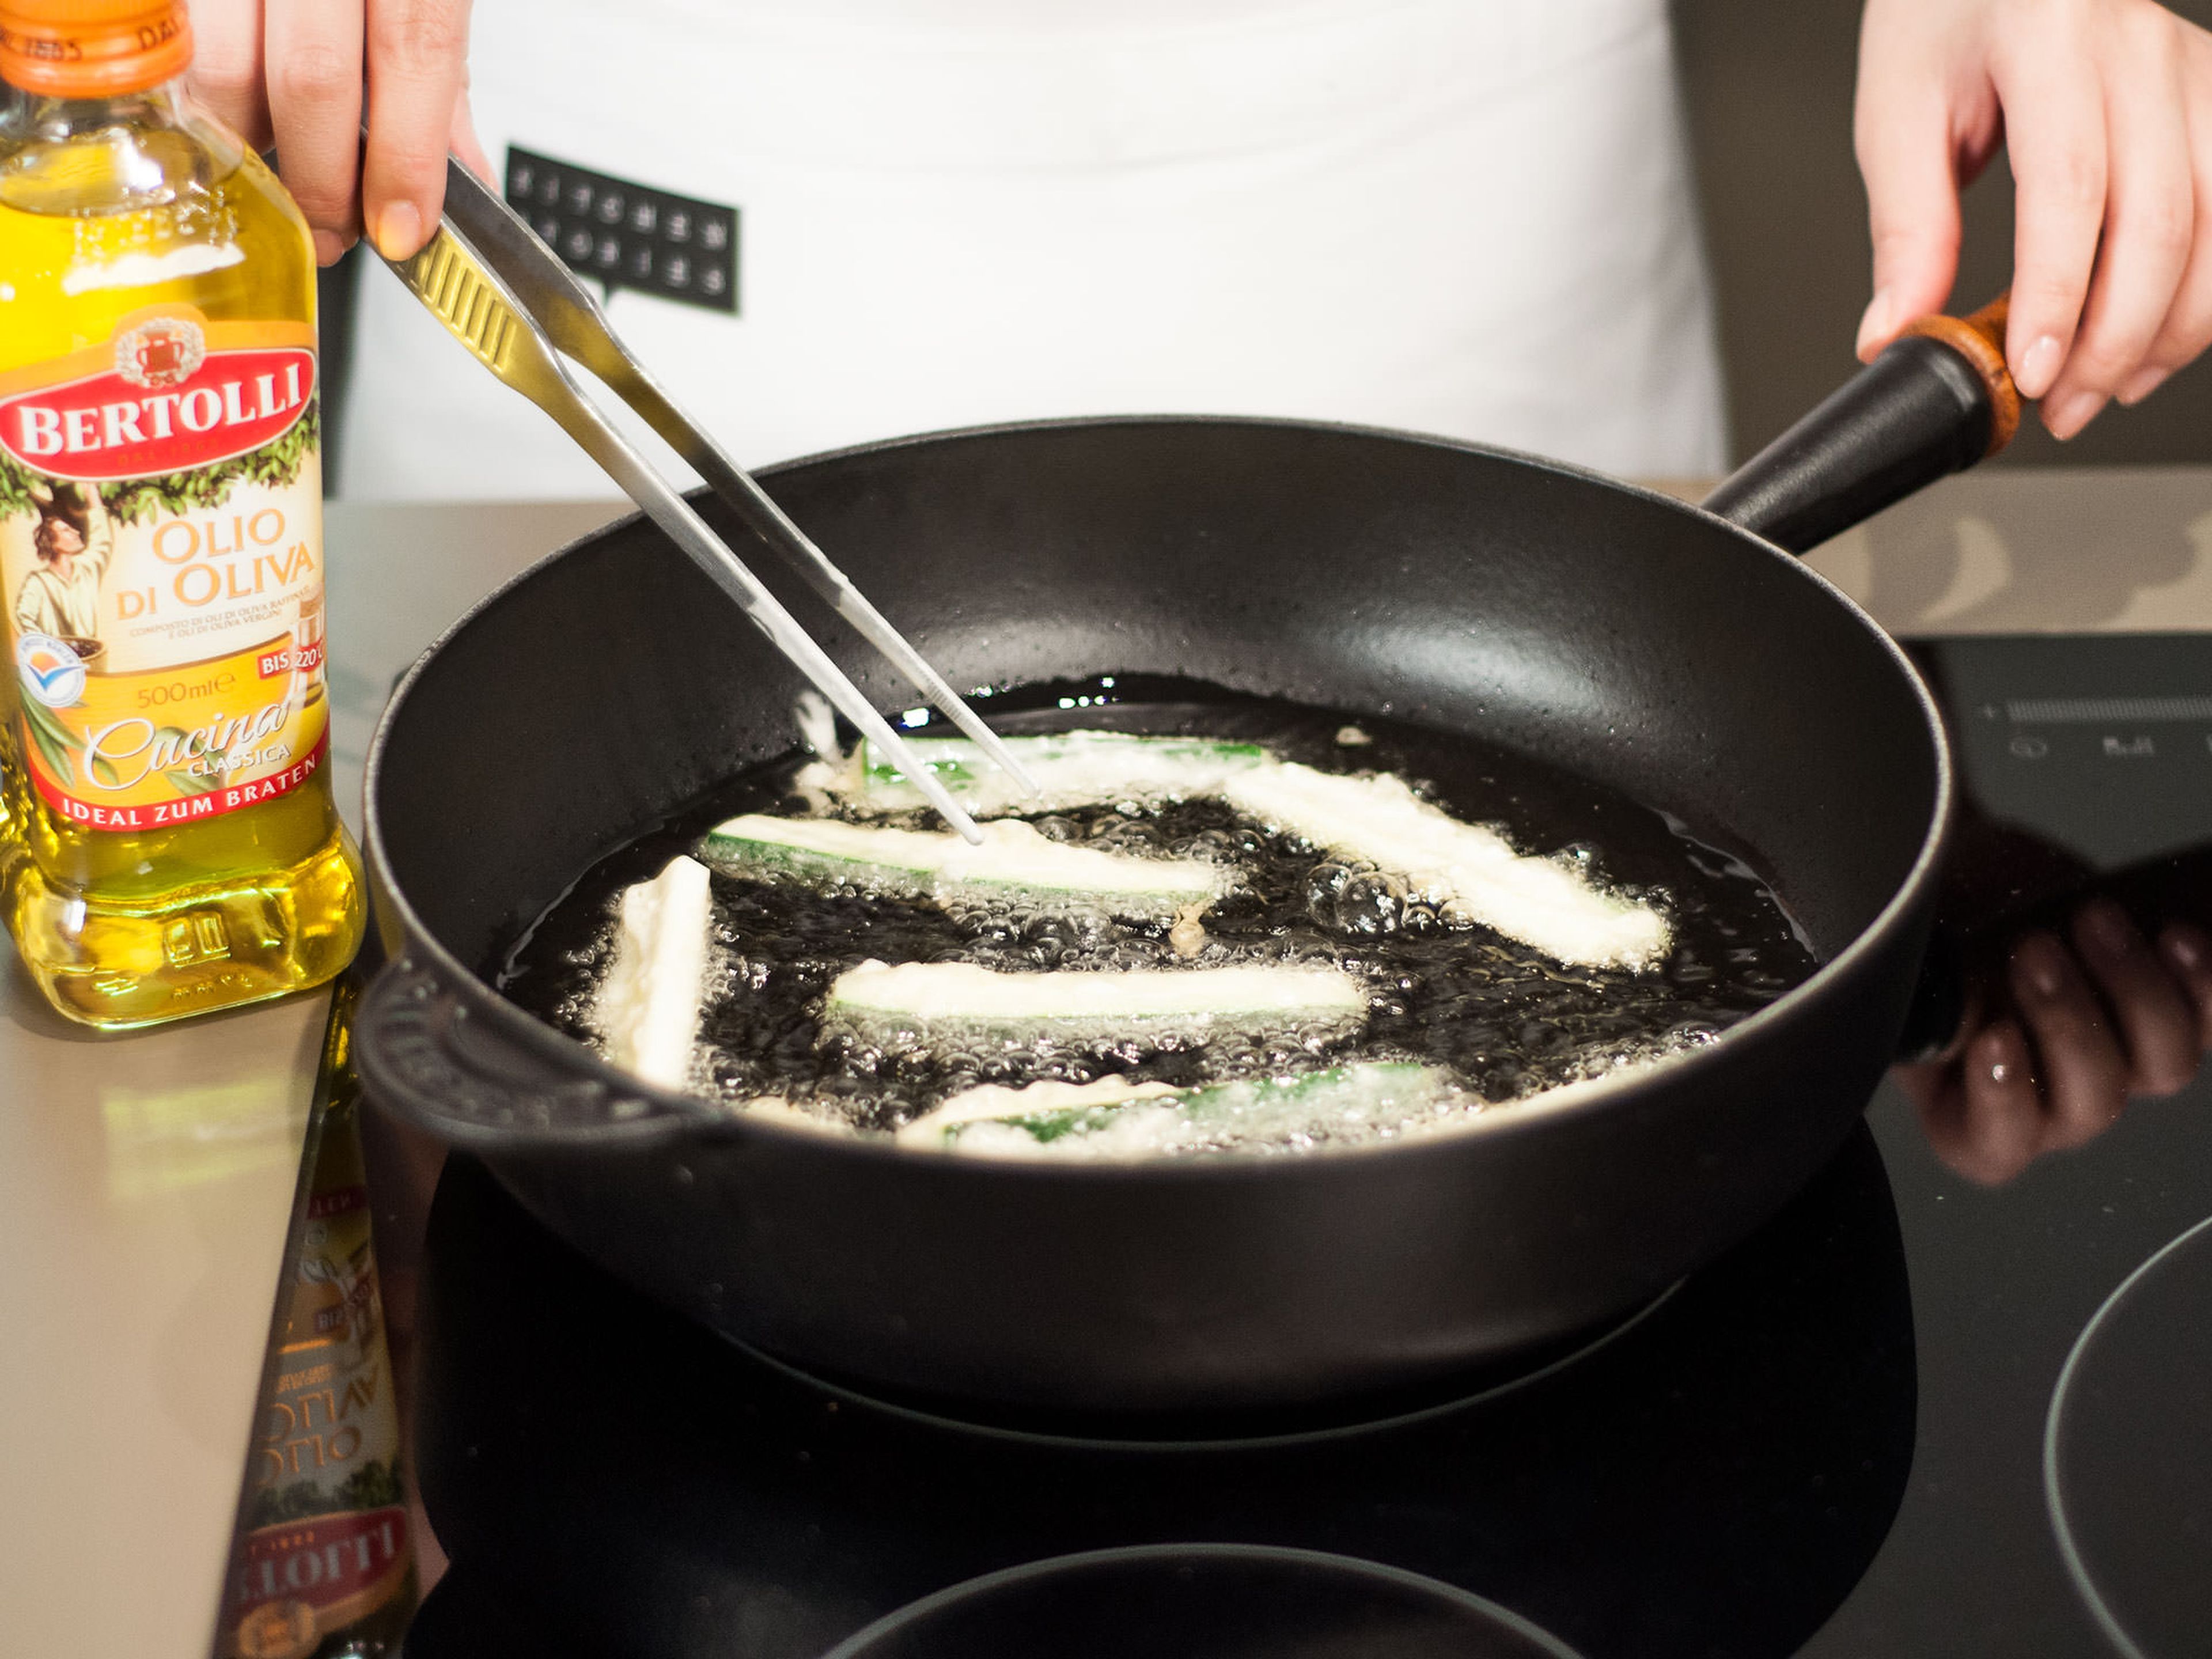 In a frying pan, heat up some vegetable oil over medium heat and cook zucchini for approx. 3 – 5 min. until golden brown. Transfer to a plate lined with paper towel and allow to cool for approx. 2 – 3 min. Then, transfer to a serving platter, drizzle with honey, and sprinkle with sea salt .Enjoy right away!